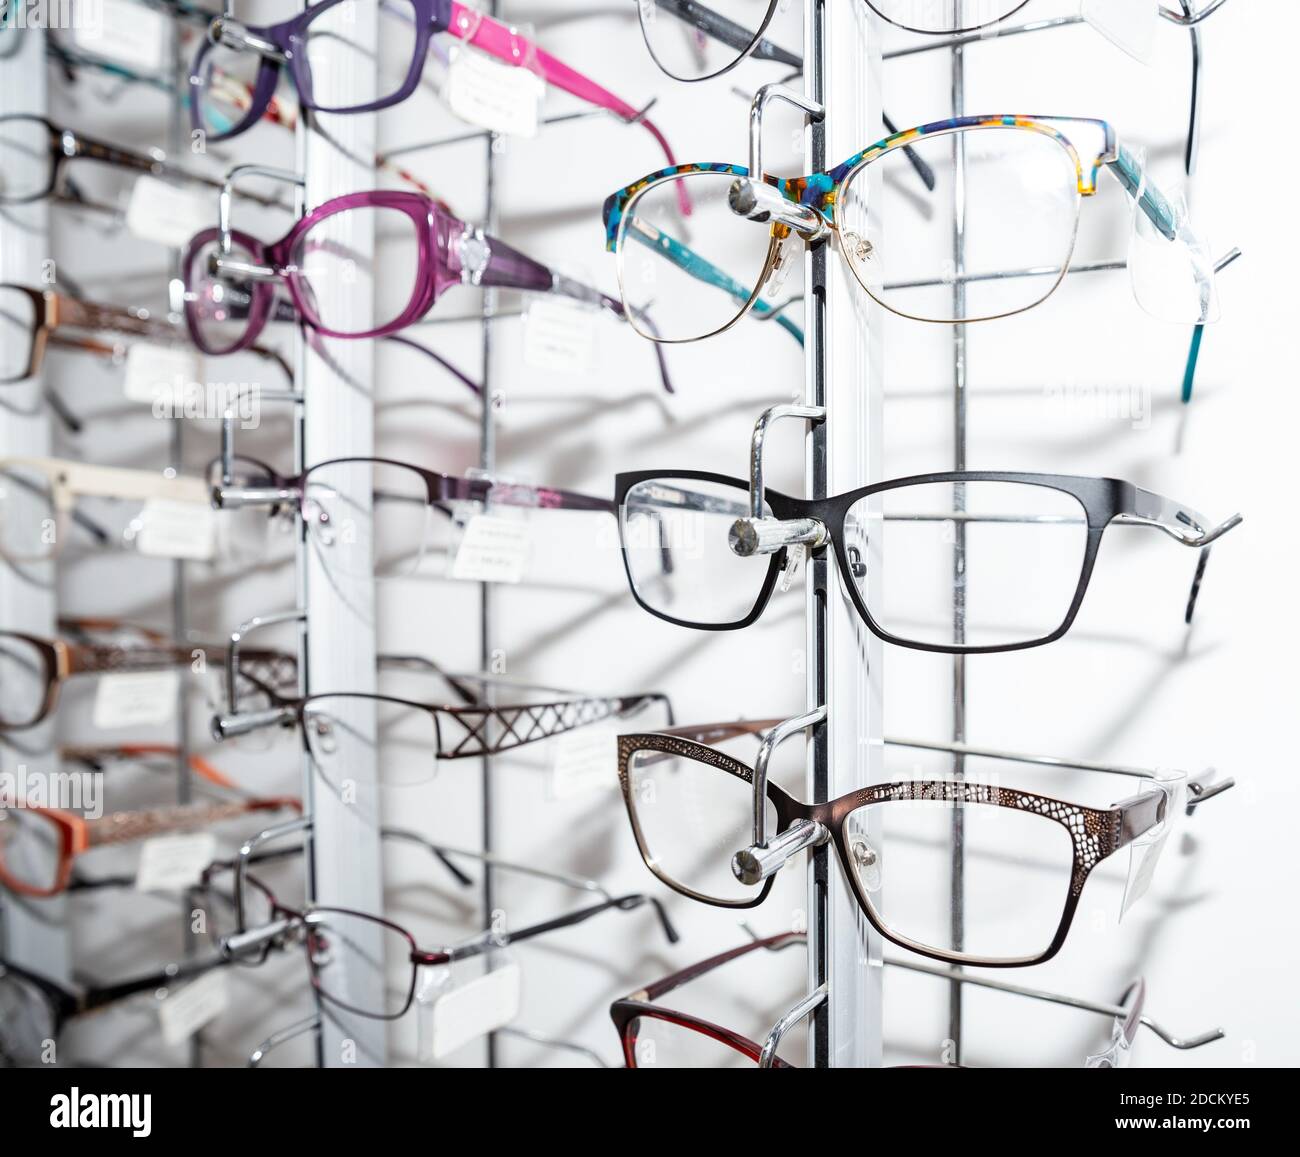 Rows of spectacle frames in optics. Glasses shop Stock Photo